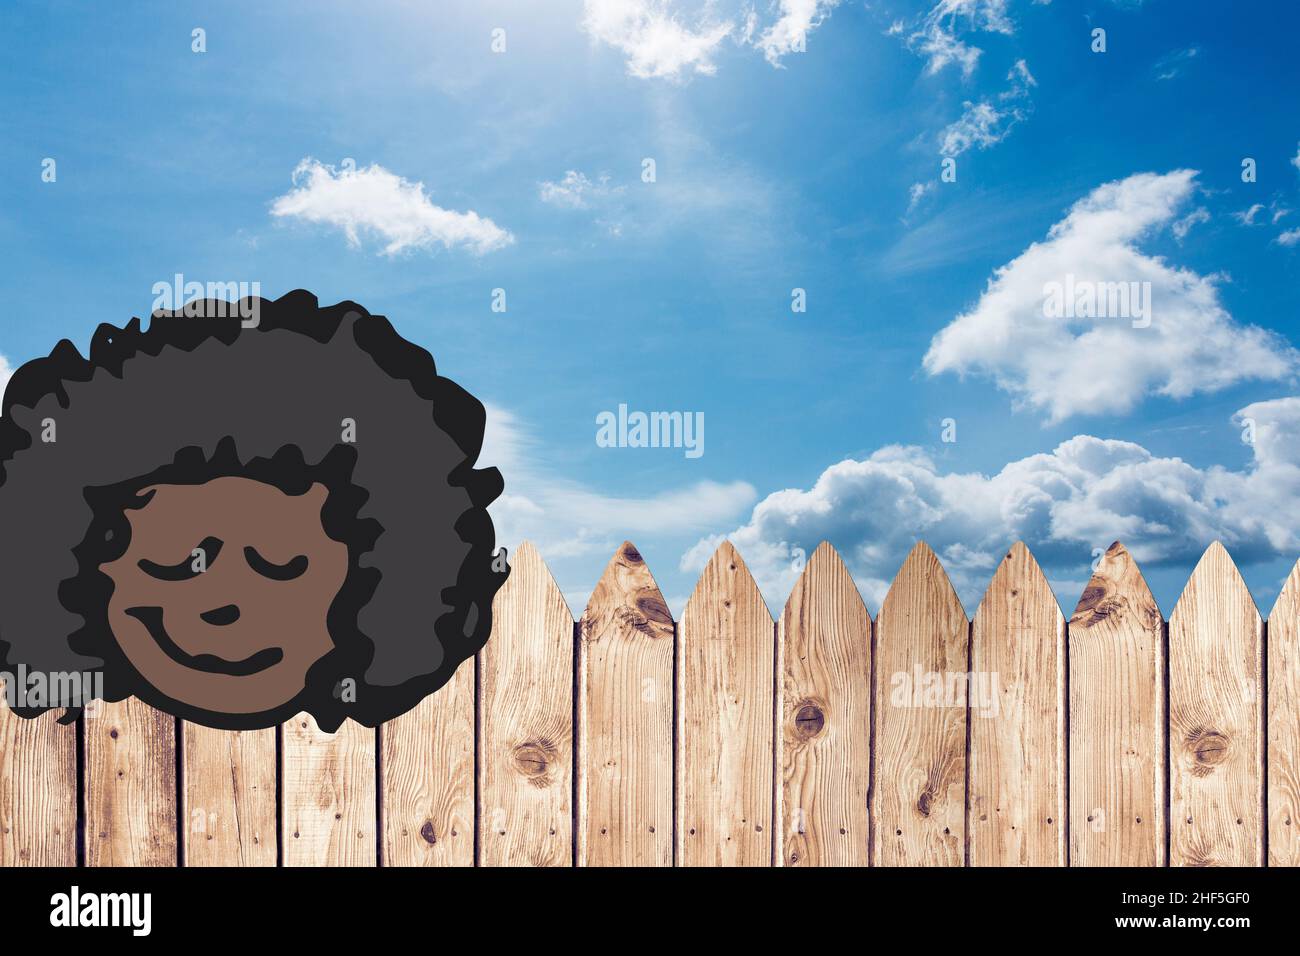 Woman face painting against wooden fence and clouds in the blue sky with copy space Stock Photo